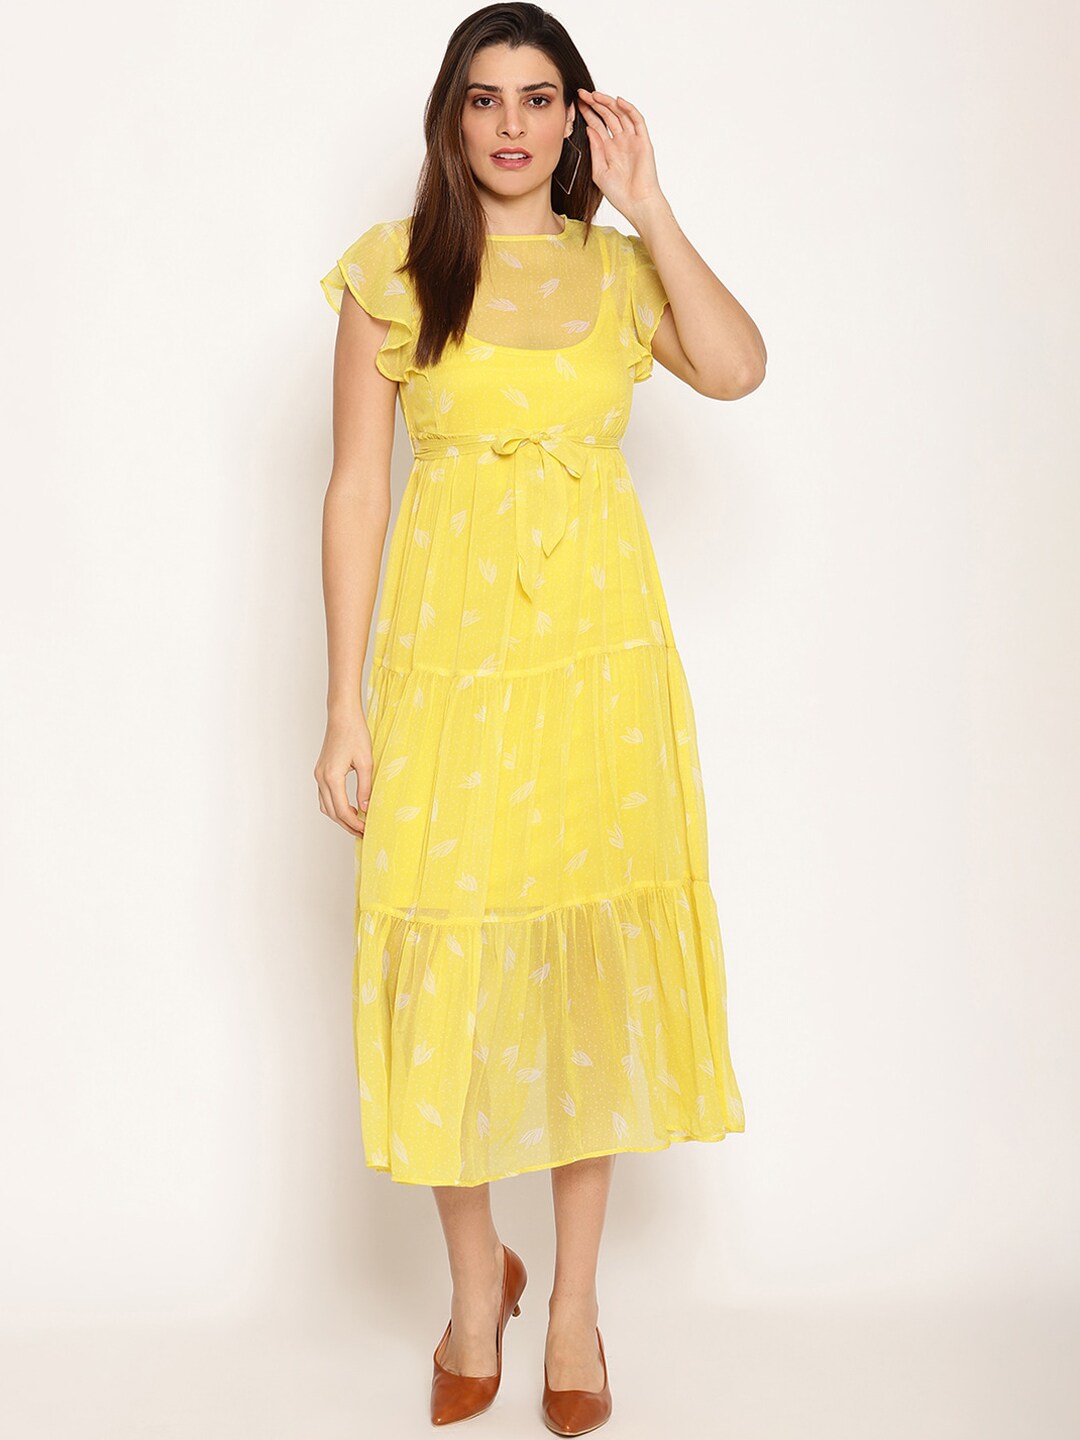 HOUSE OF KKARMA Women Yellow Printed Fit and Flare Dress